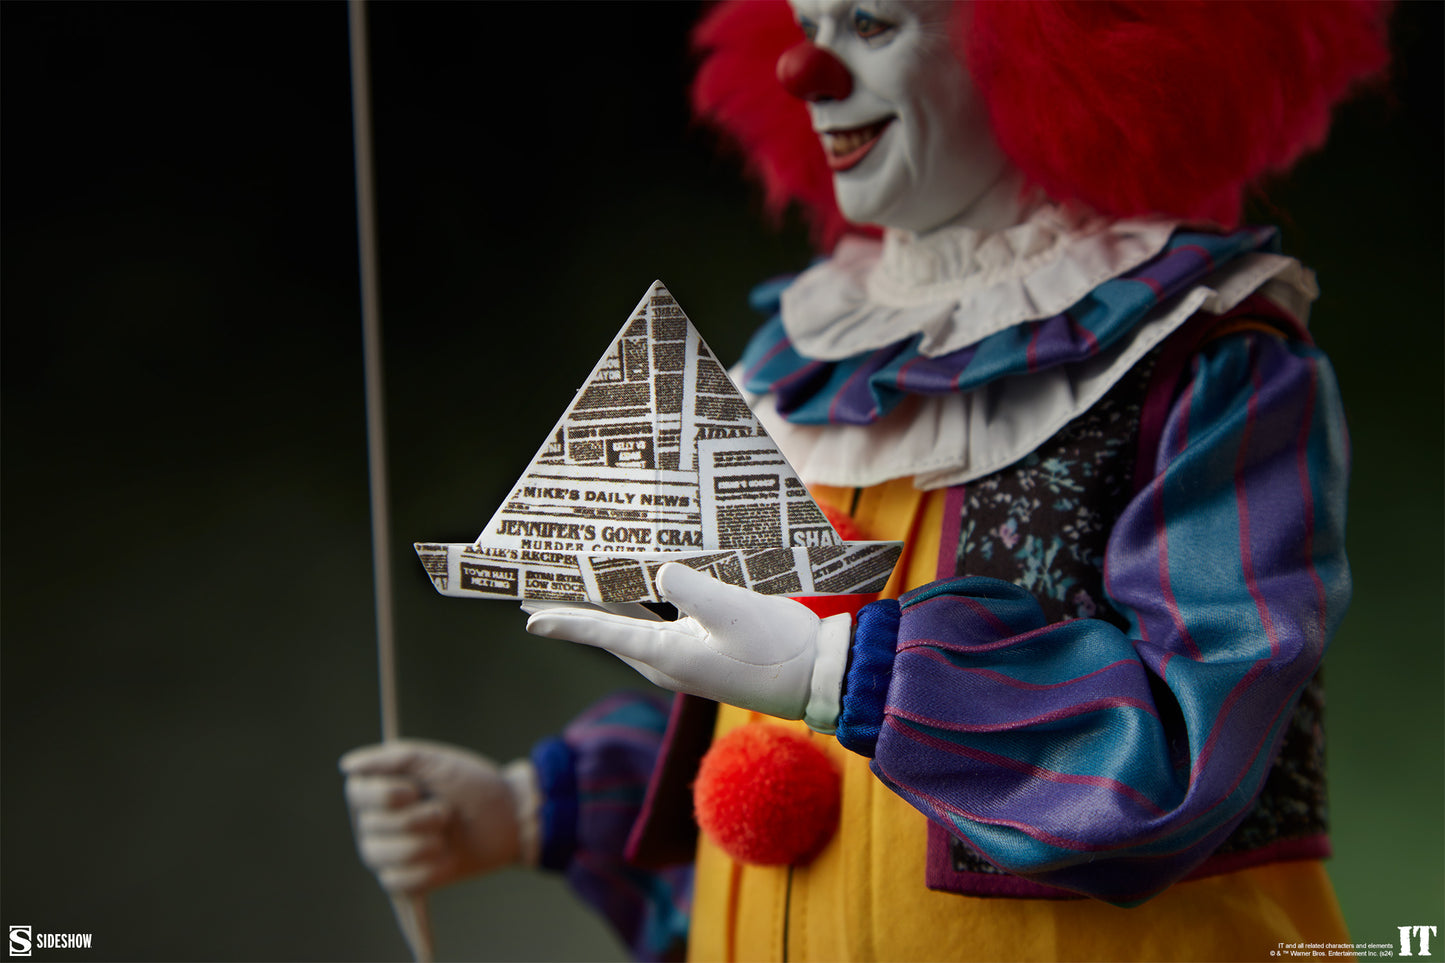 PRE-ORDER Pennywise Sixth Scale Figure